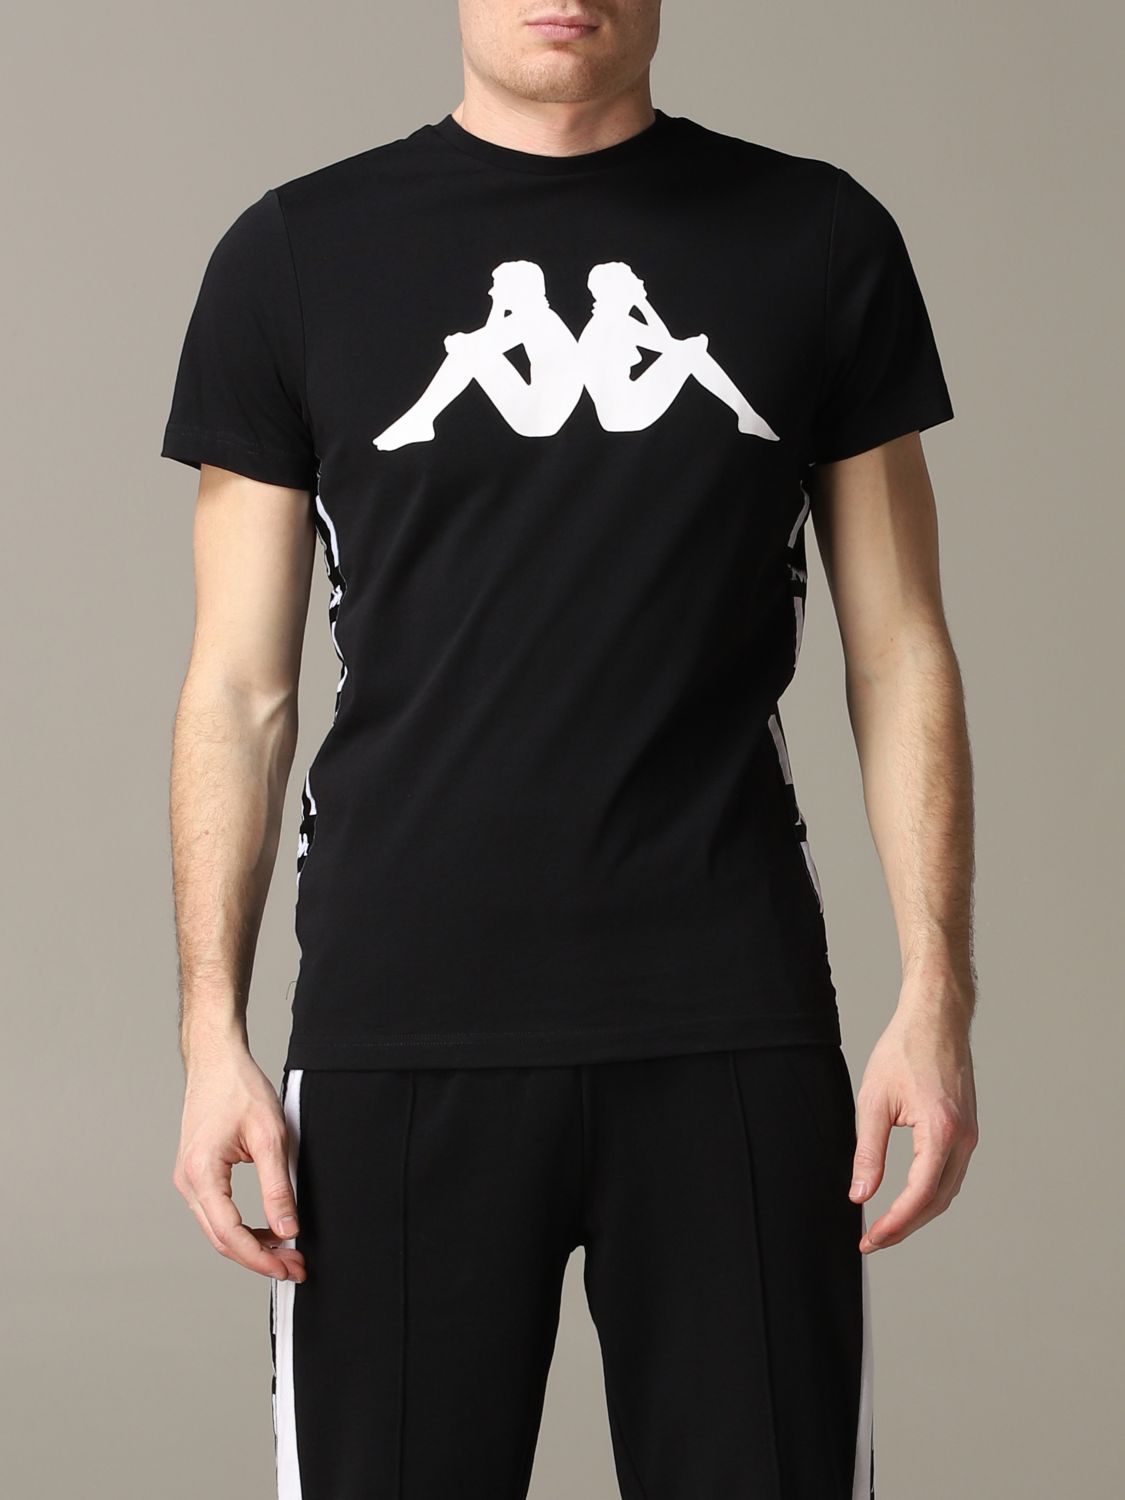 Kappa Outlet: t-shirt for man - Black | Kappa t-shirt online on GIGLIO.COM